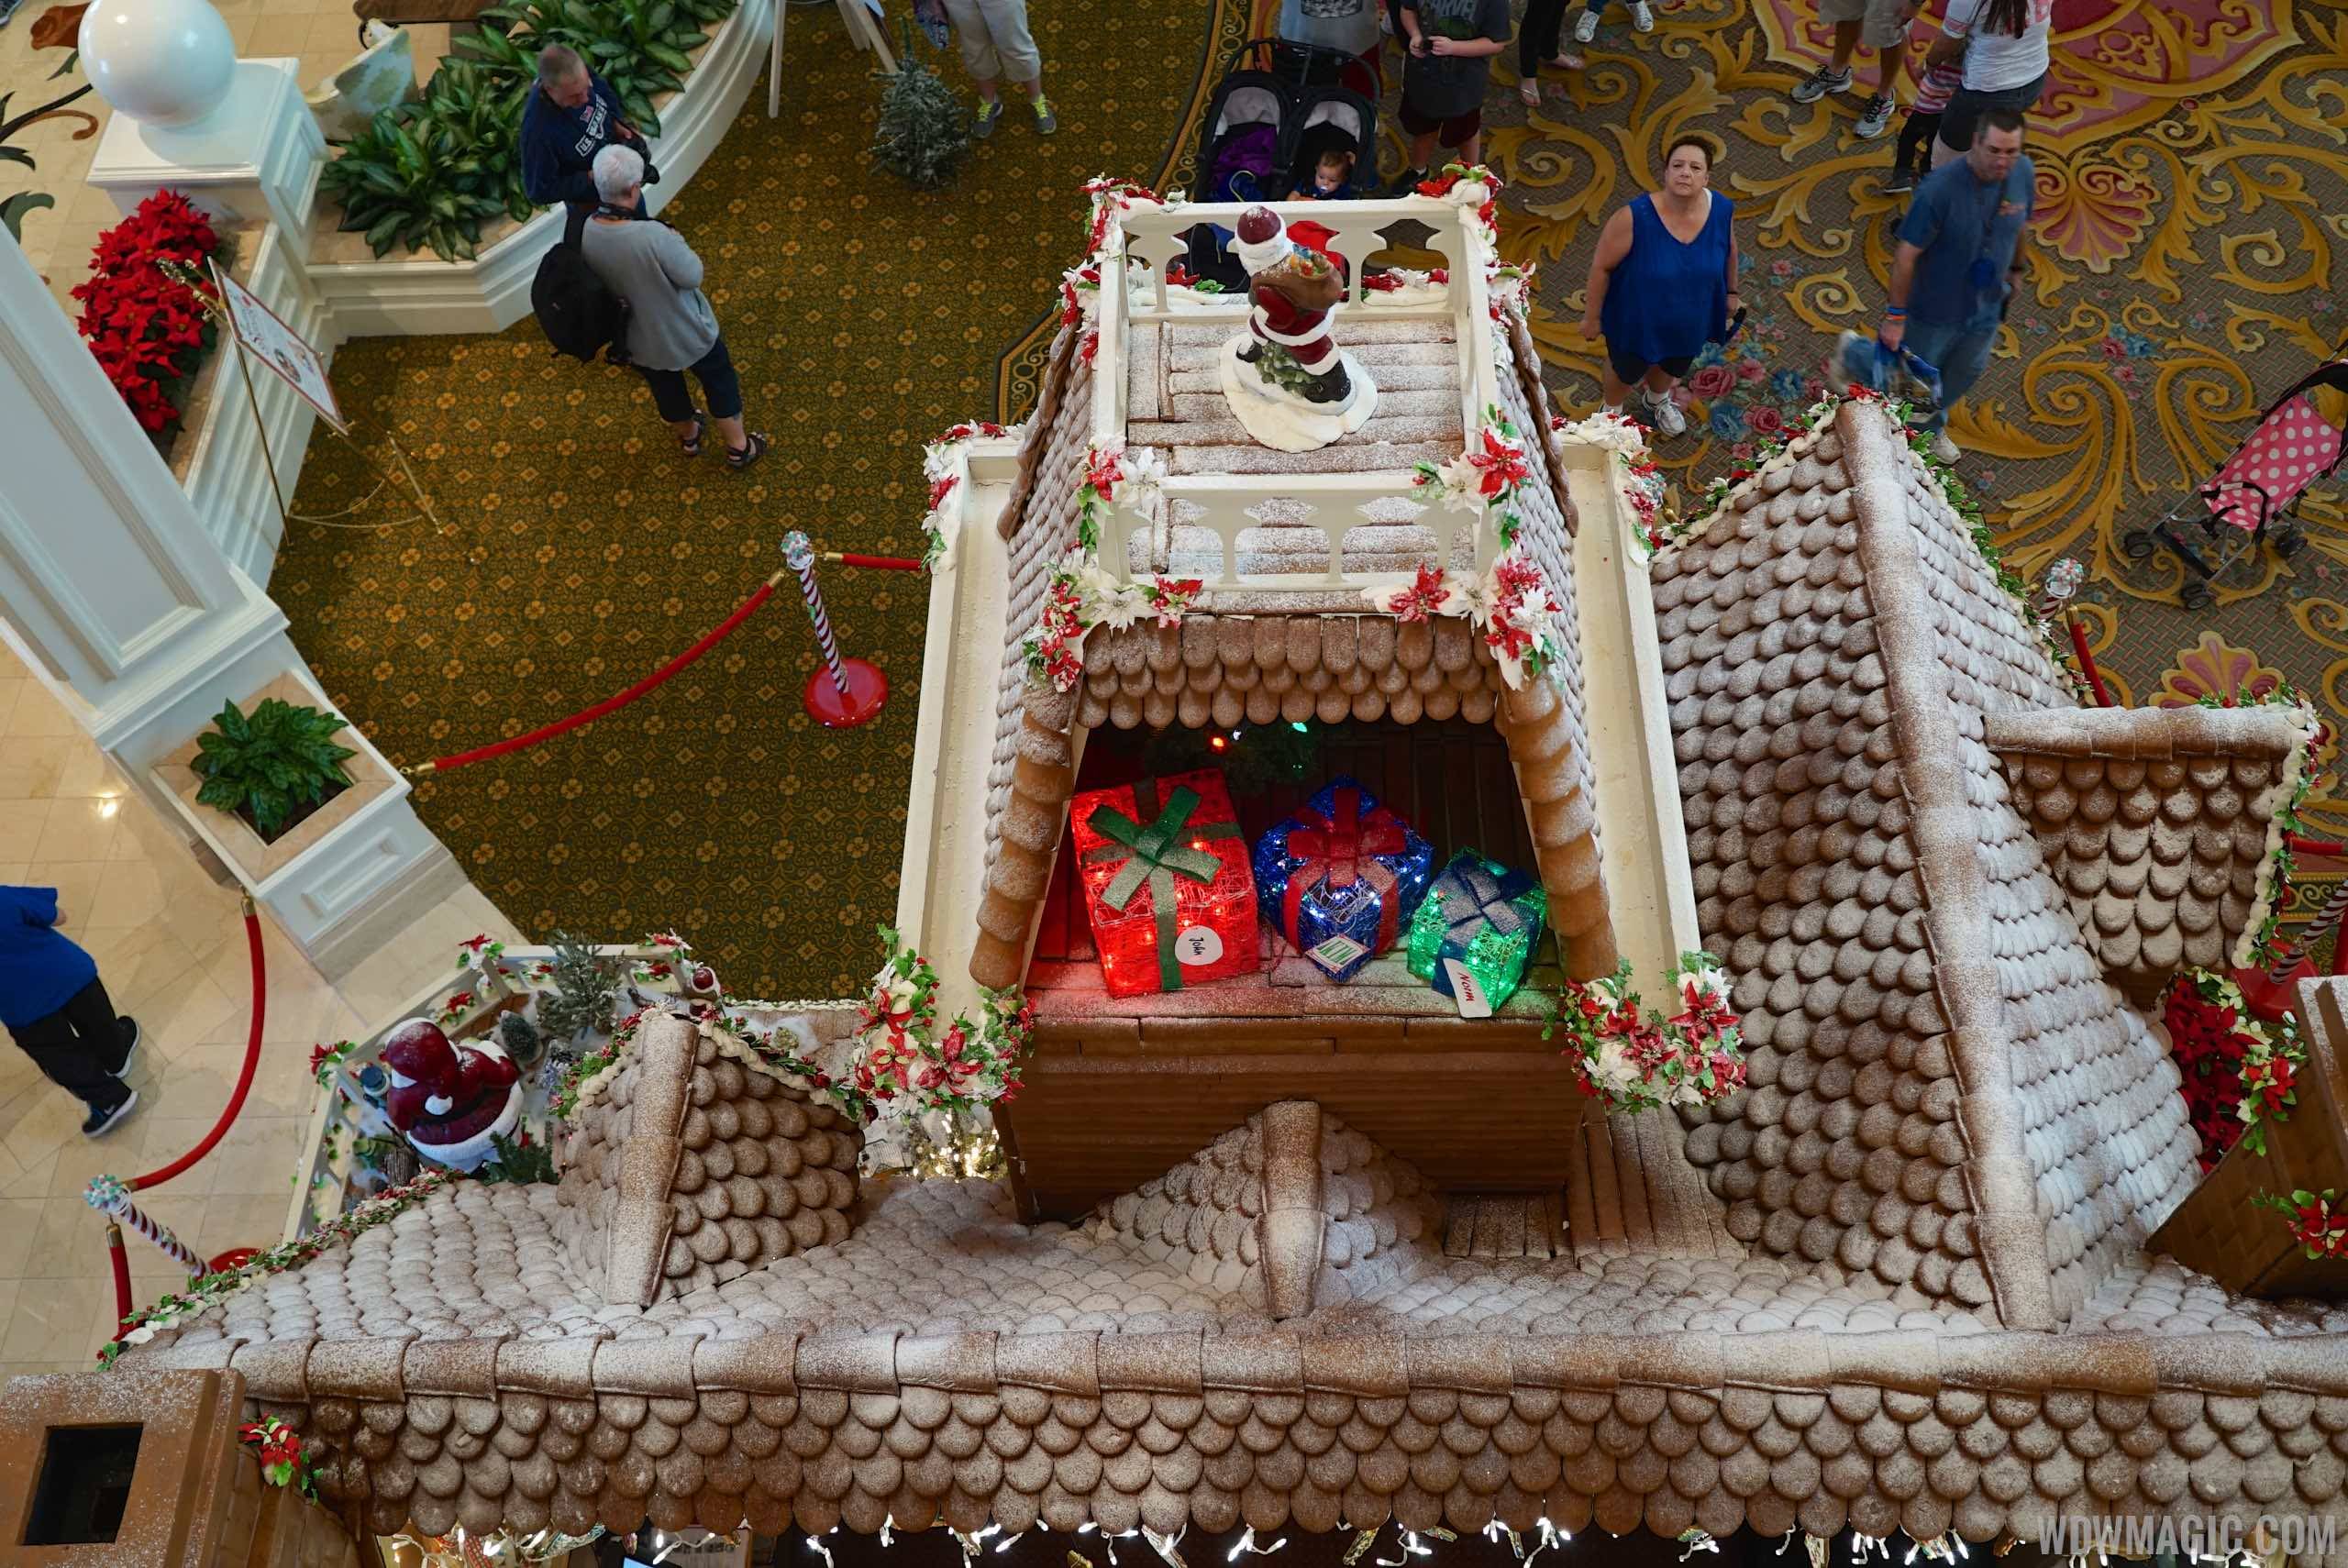 PHOTOS - Gingerbread House now open at Disney's Grand Floridian Resort